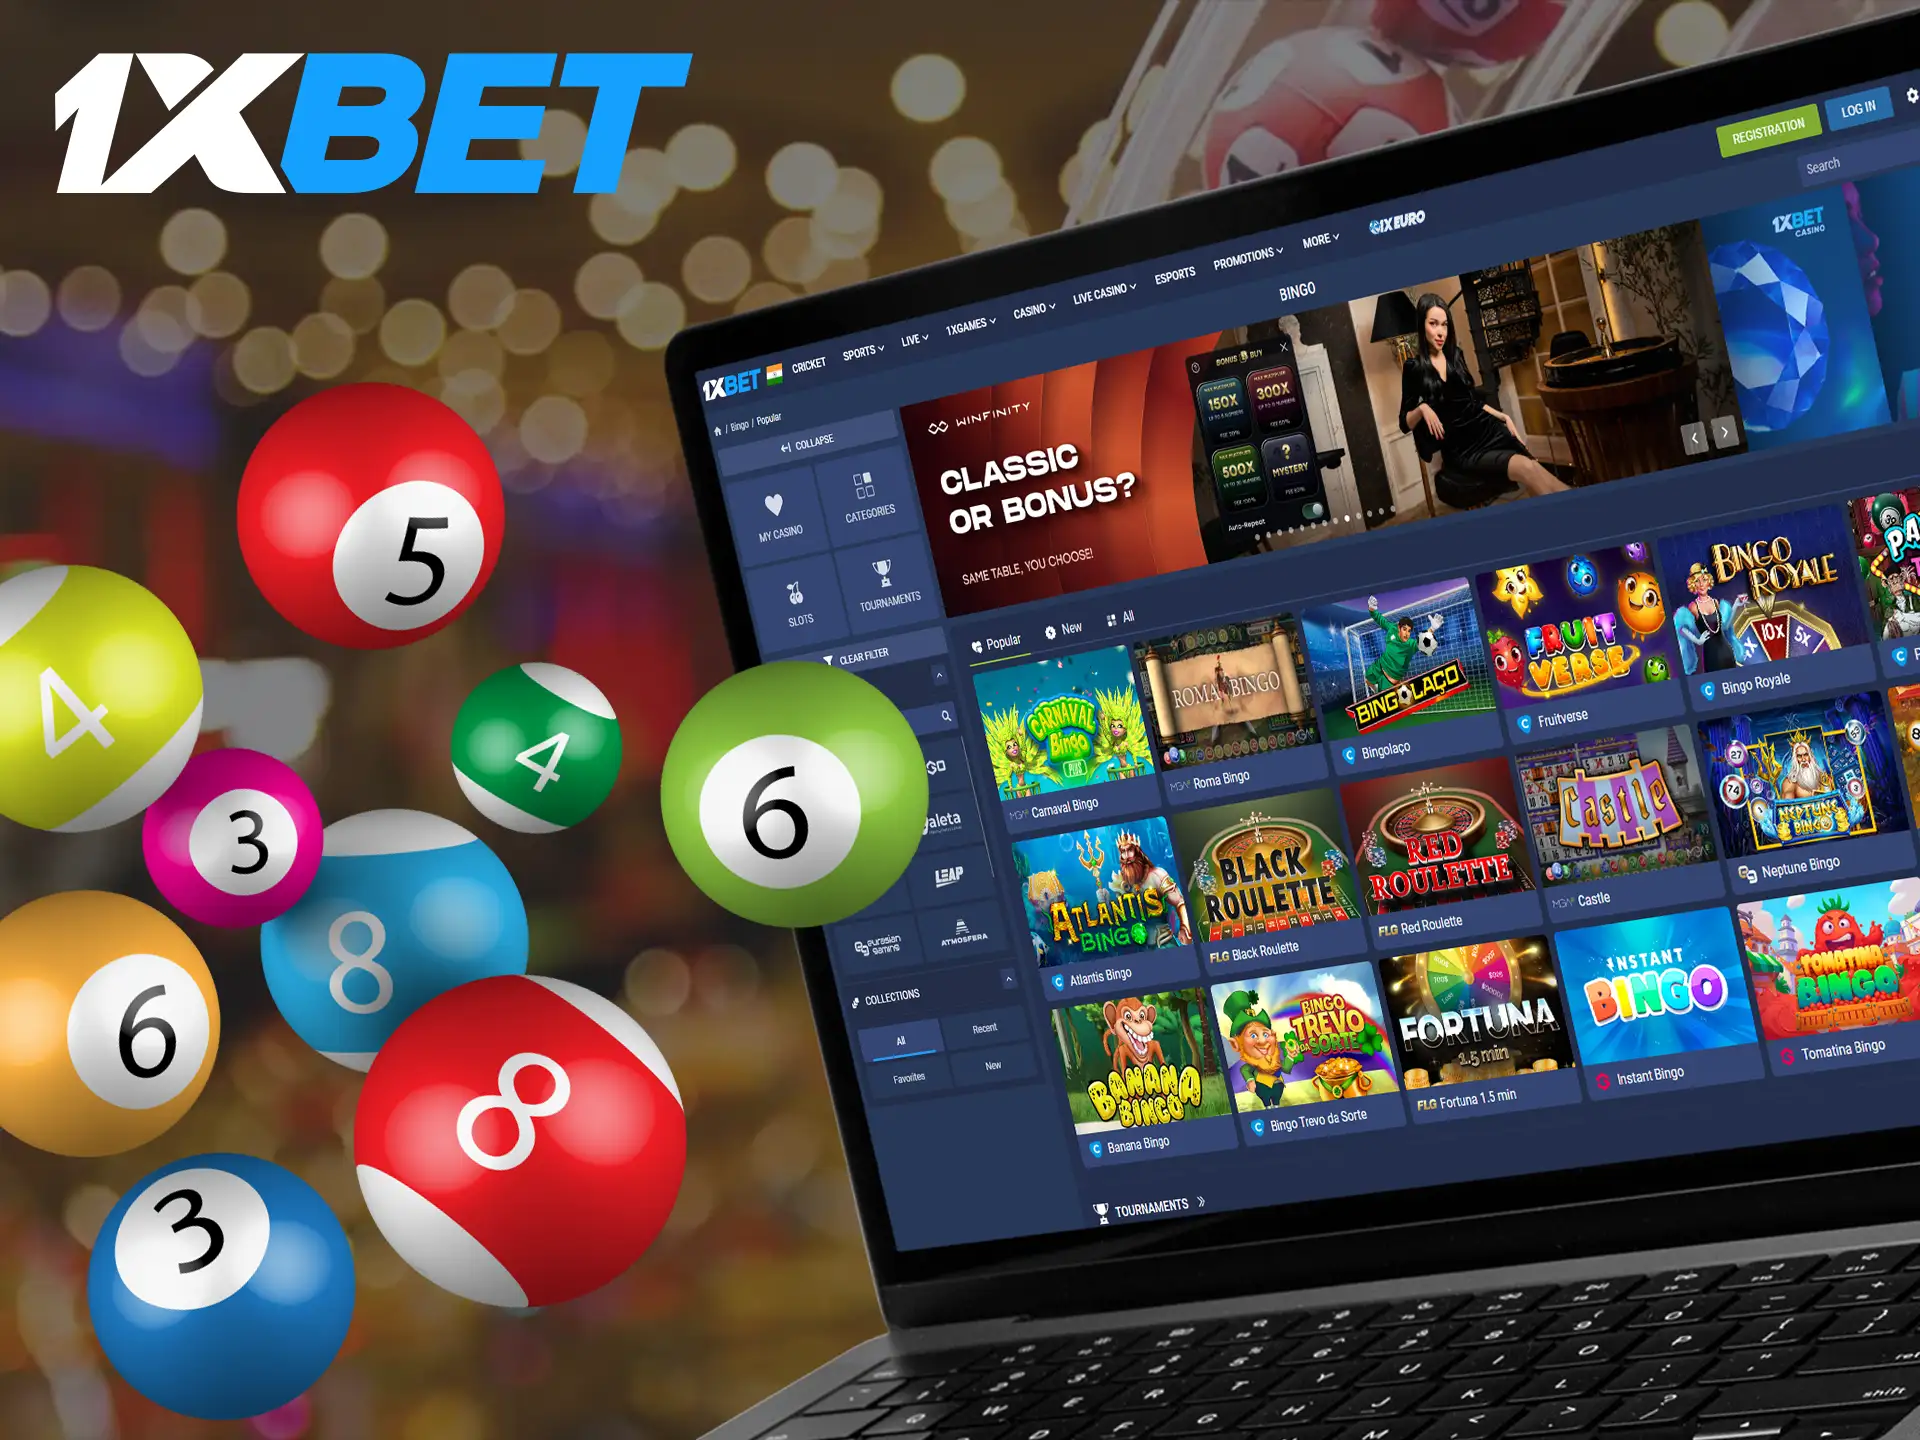 Bingo is a popular online game available to play at 1xBet.